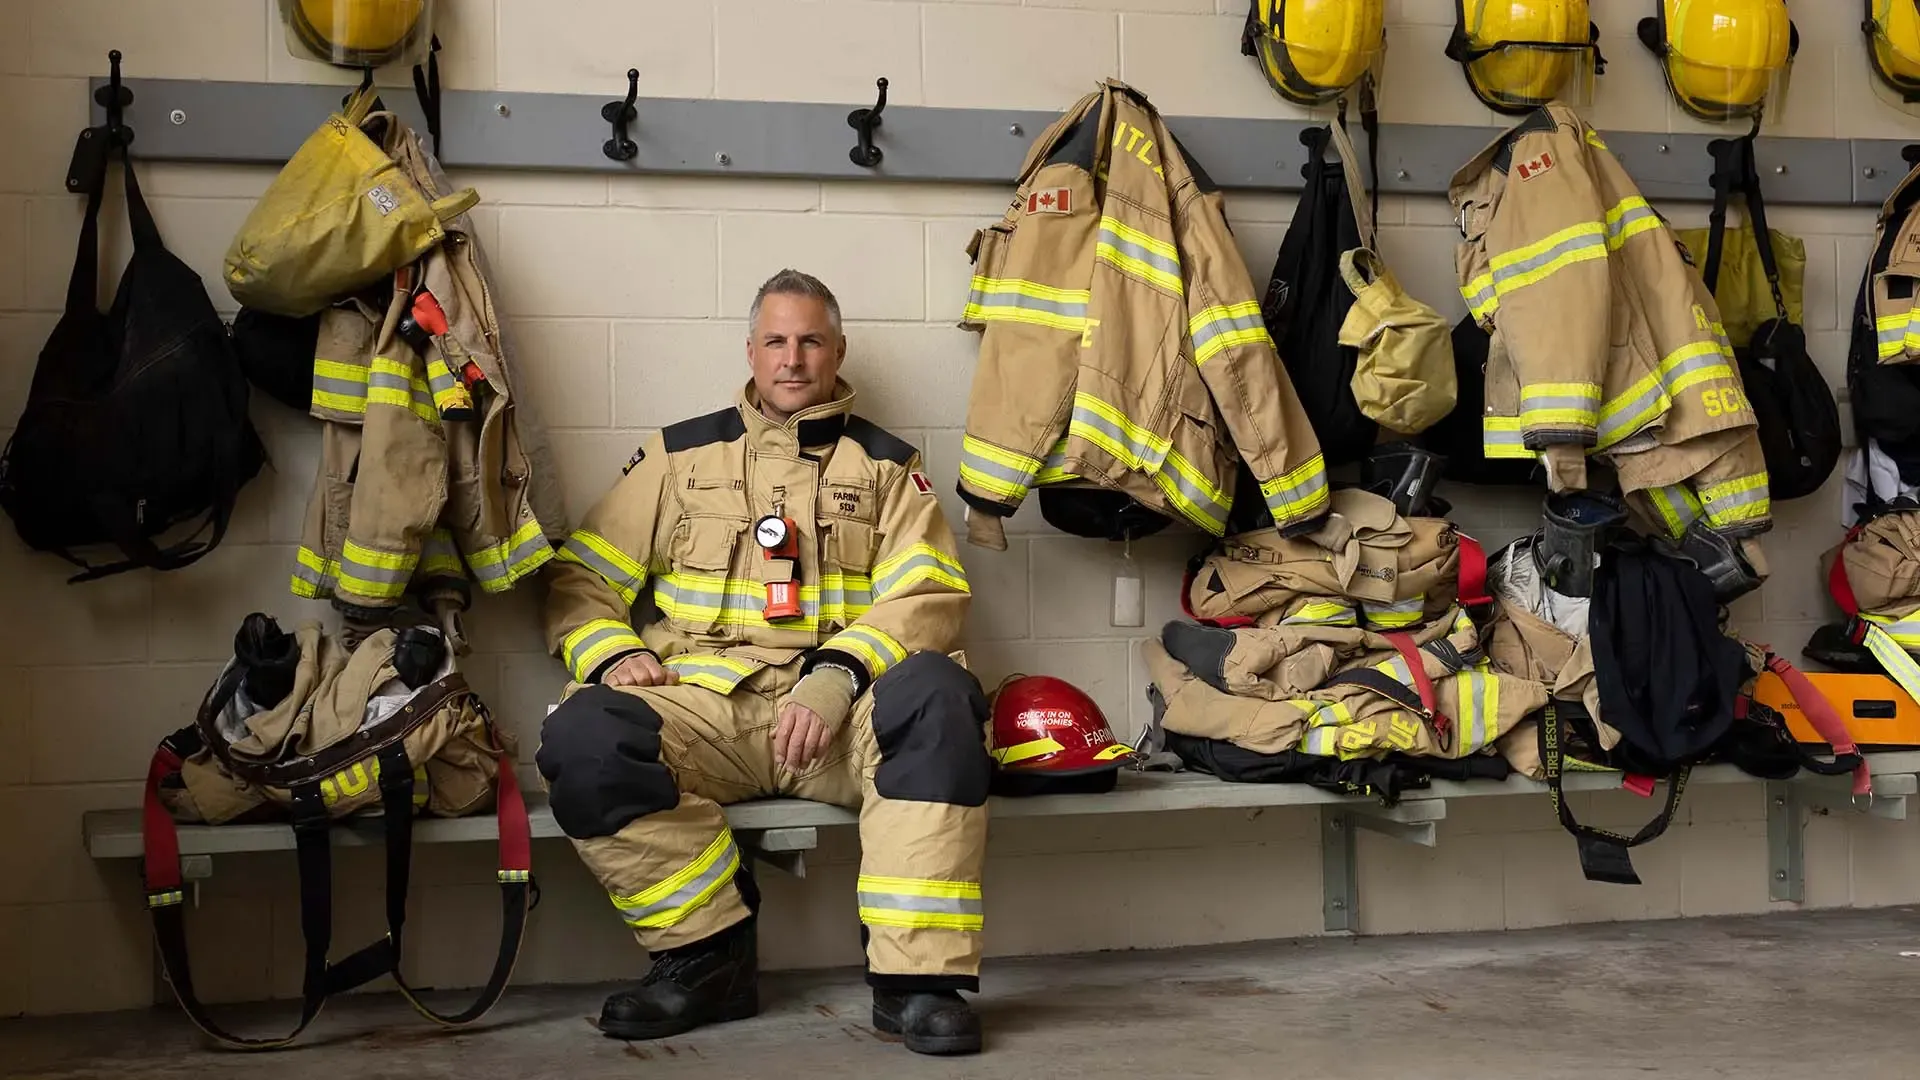 Firefighter in full gear, sitting in station's change room, looking to camera.